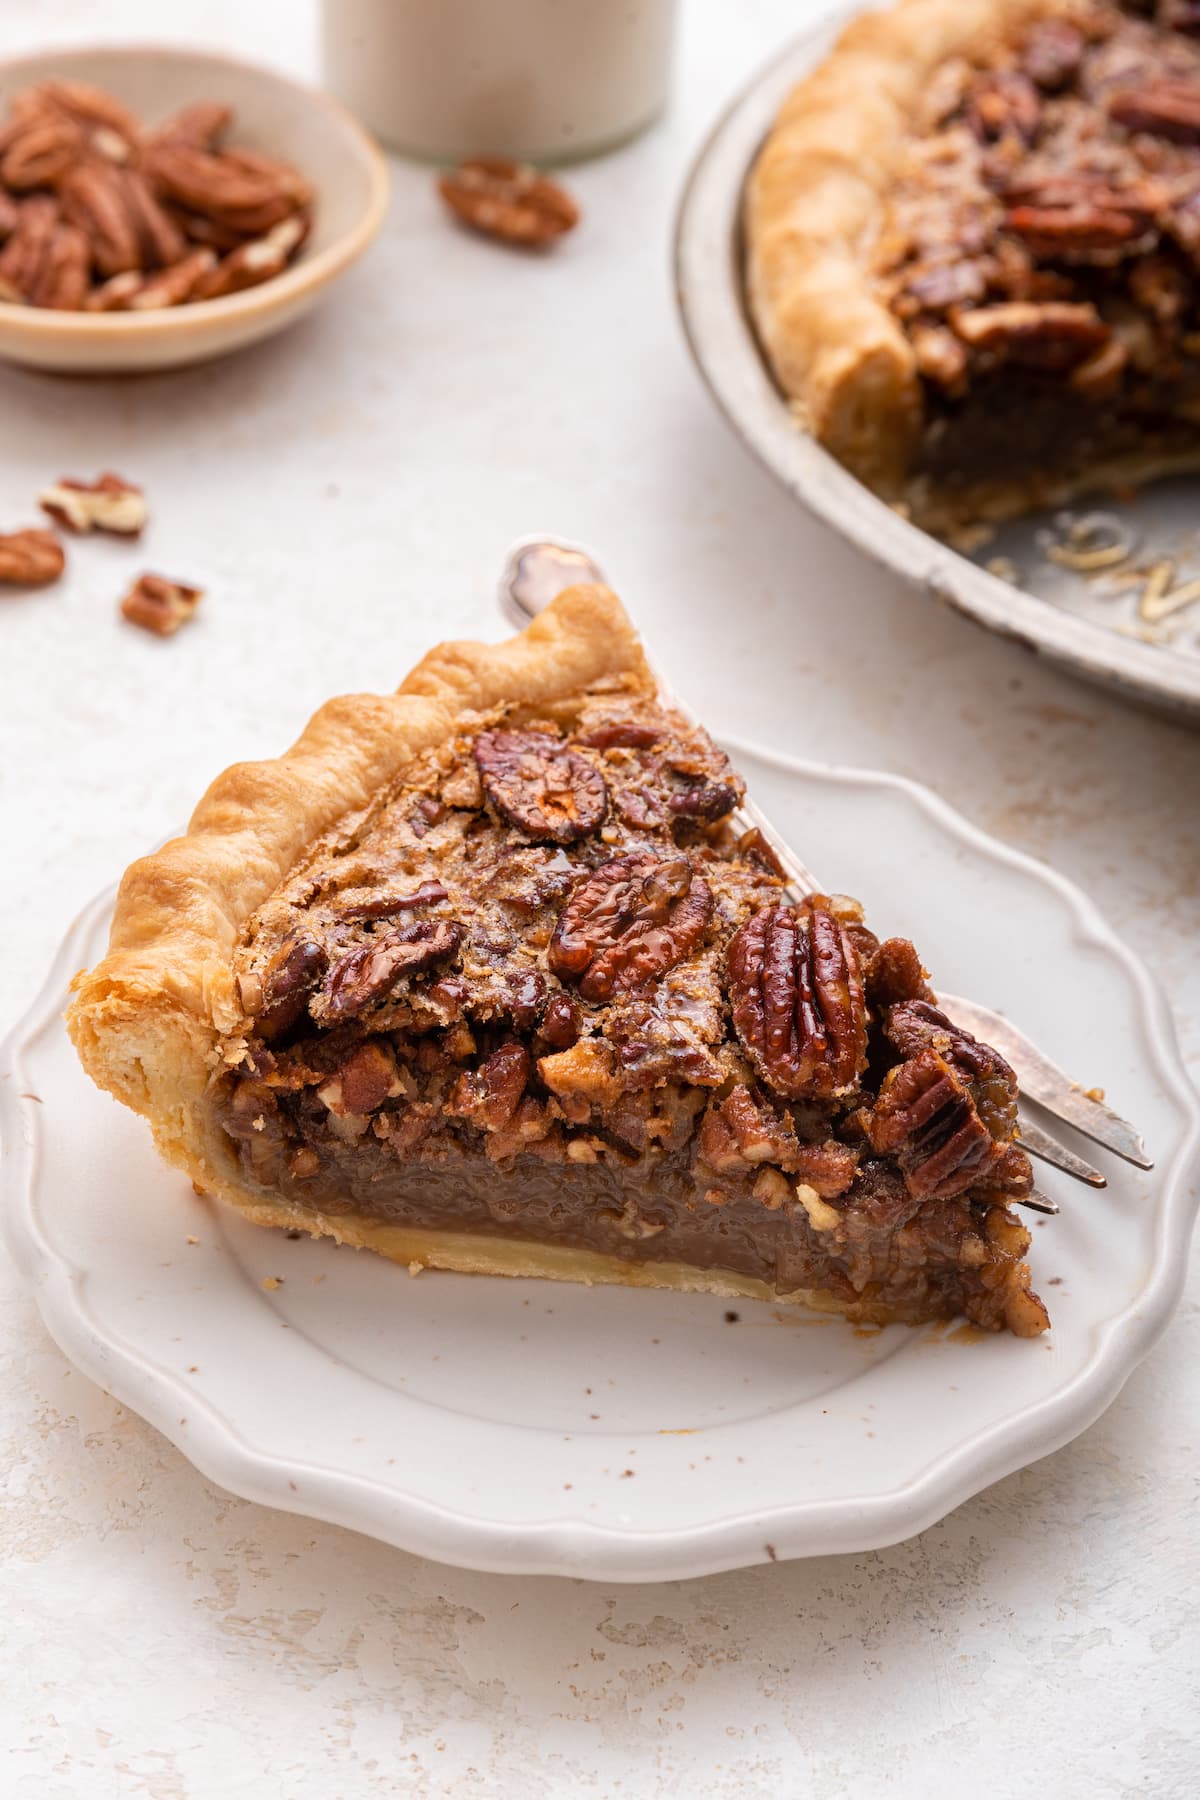 A slice of pecan pie on a plate served with a fork.